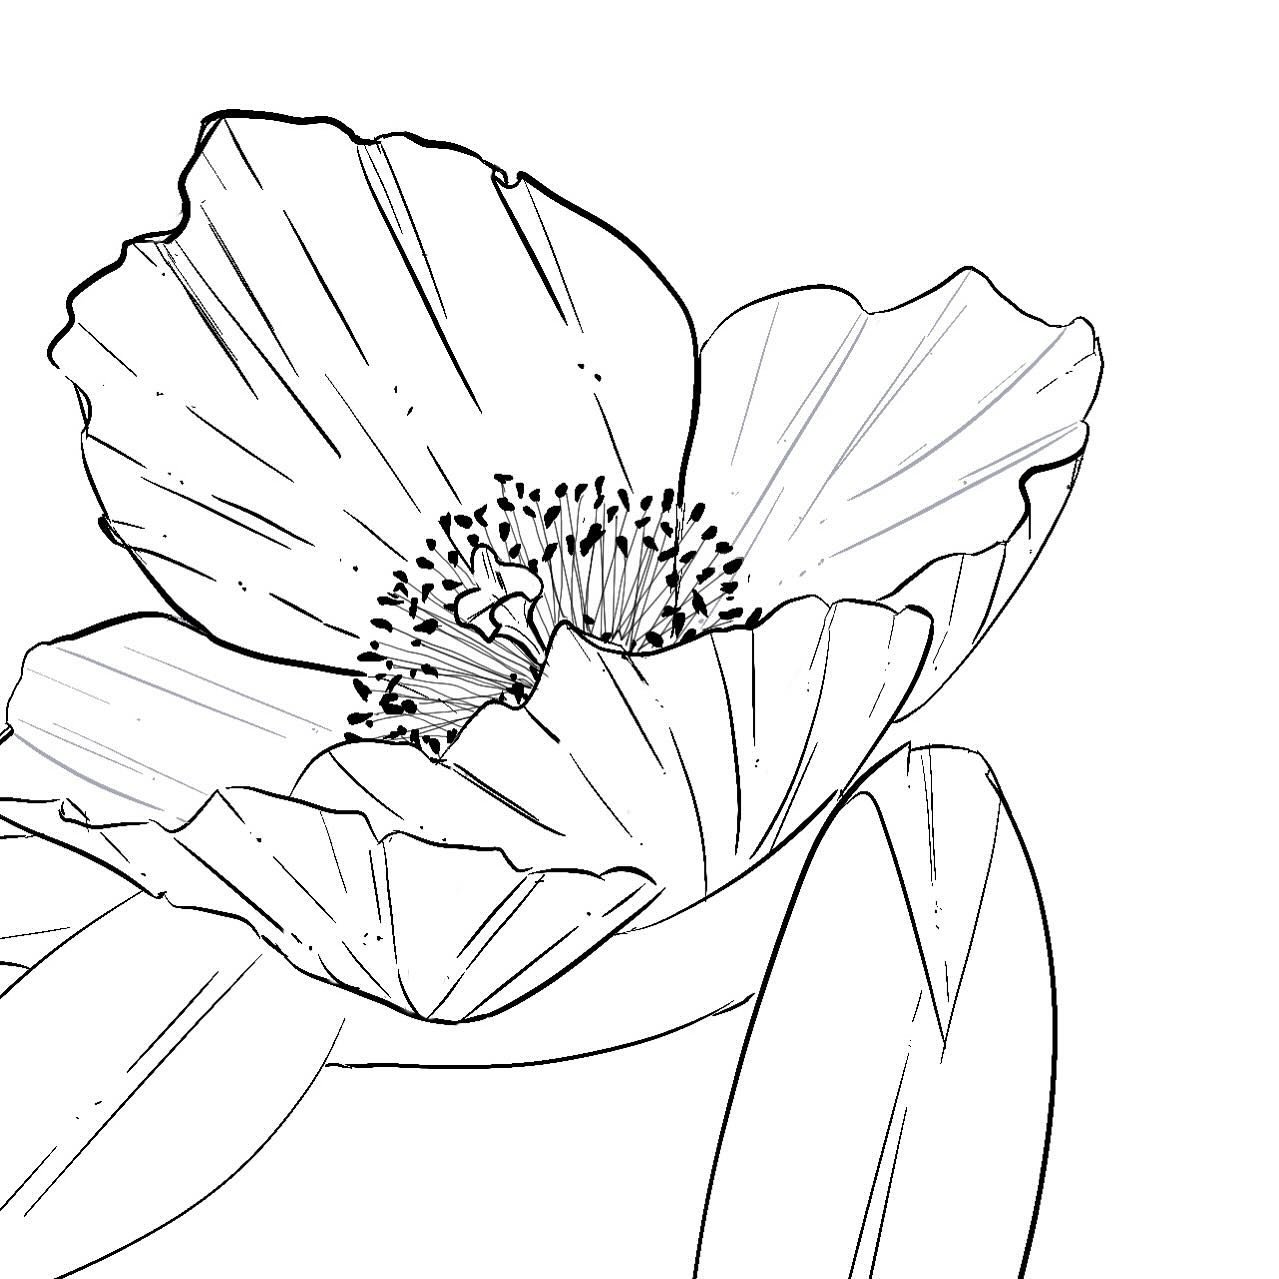 Some midweek #lineart practice on #procreate (#procreateflowers ). Working in a few of these to shift into #watercolorart this weekend as a group :). 

#arthealsthesoul #alwayslearning